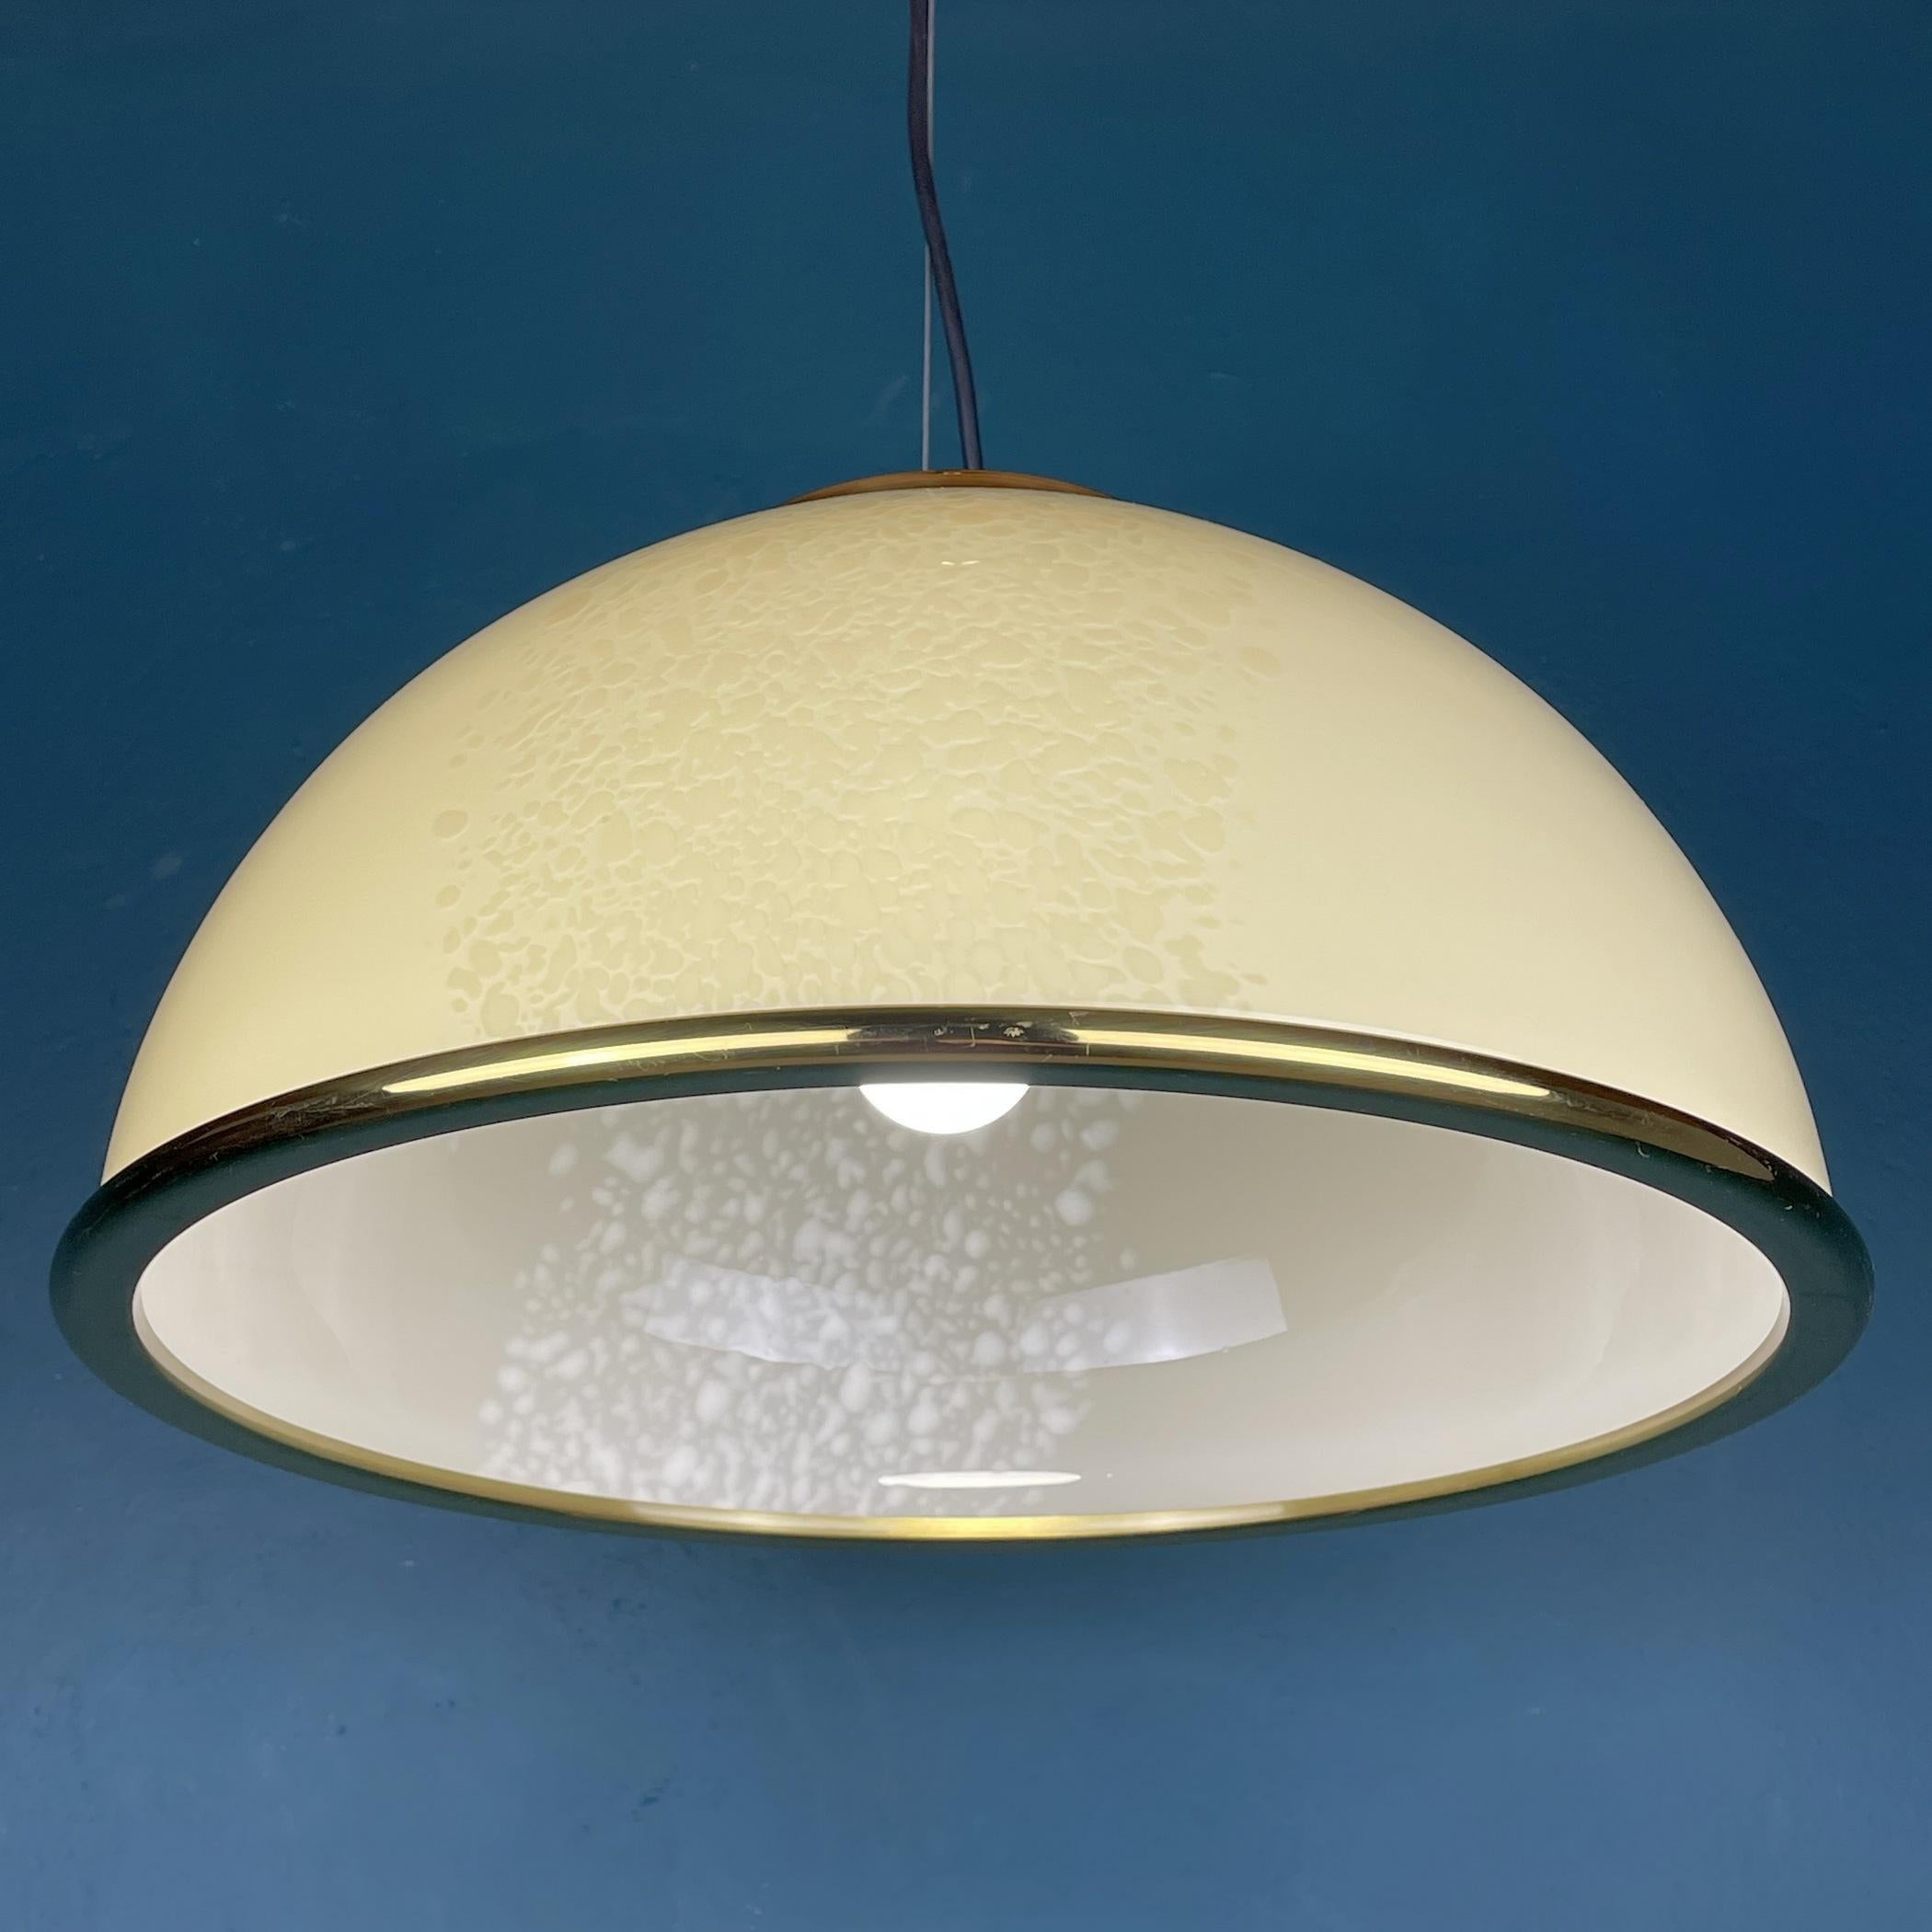 Vintage Beige Murano Glass Pendant Lamp by F.Fabbian Italy 70s For Sale 1